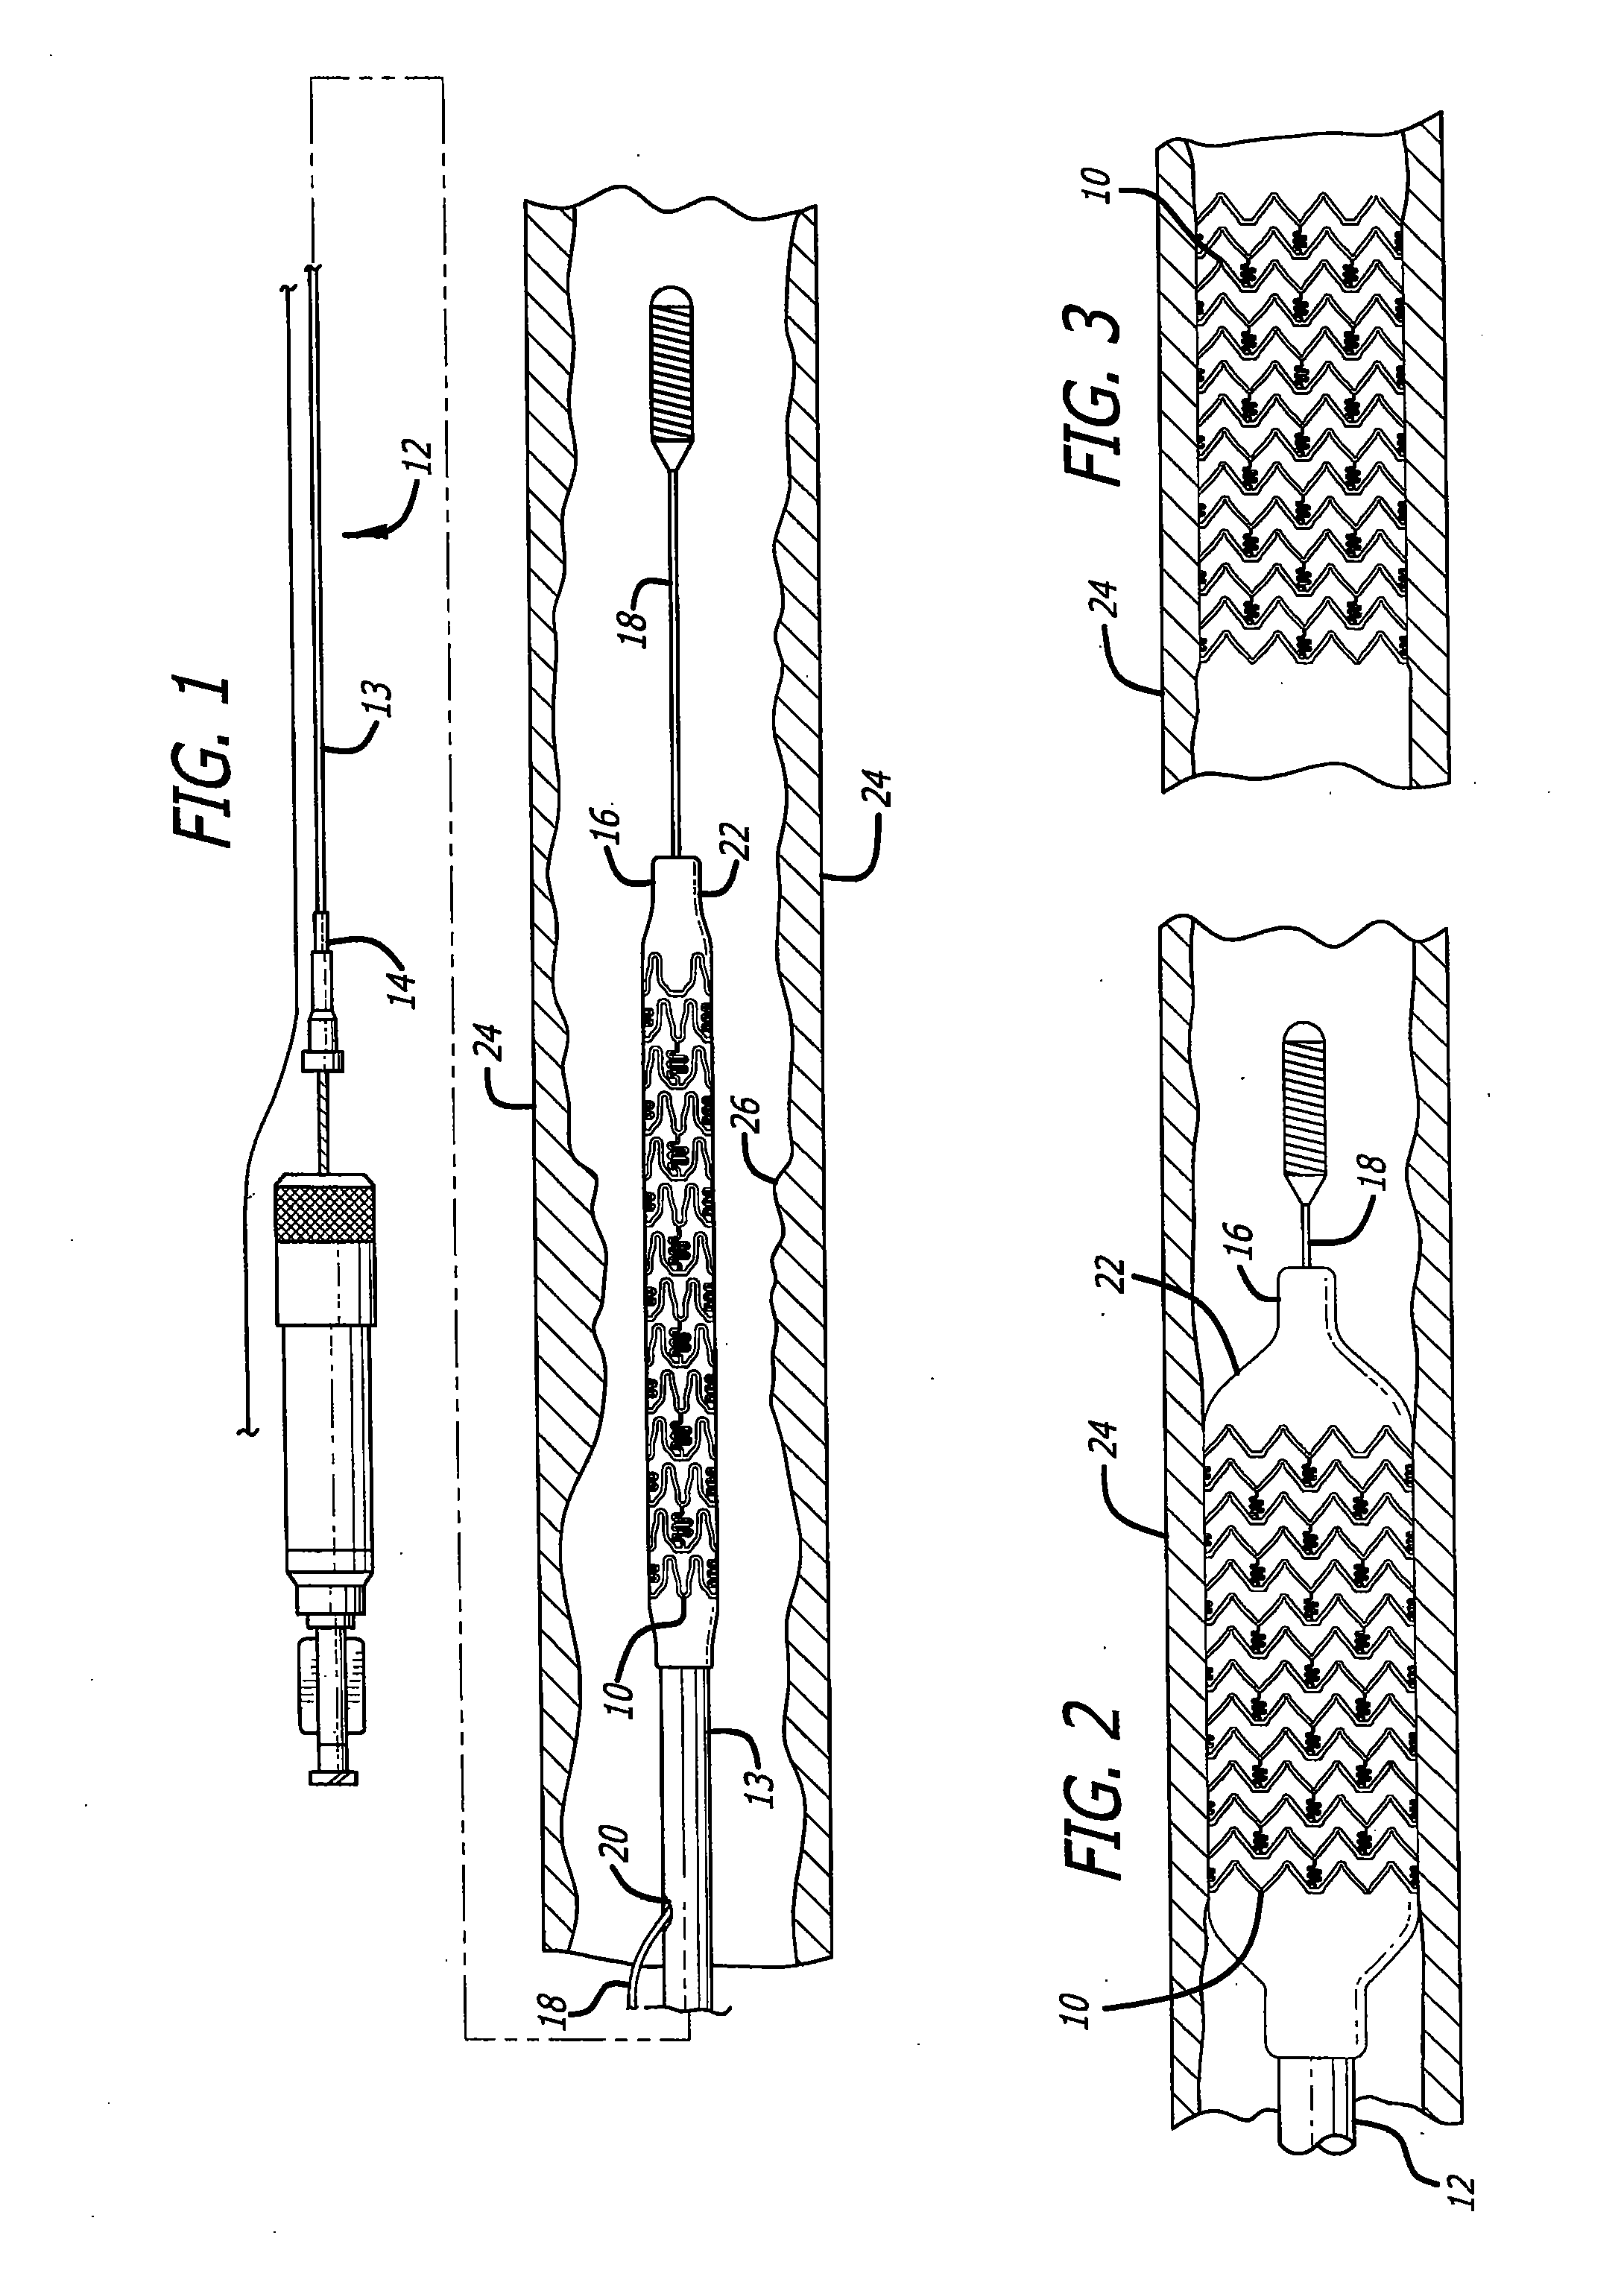 Apparatus and method for formation of foil-shaped stent struts